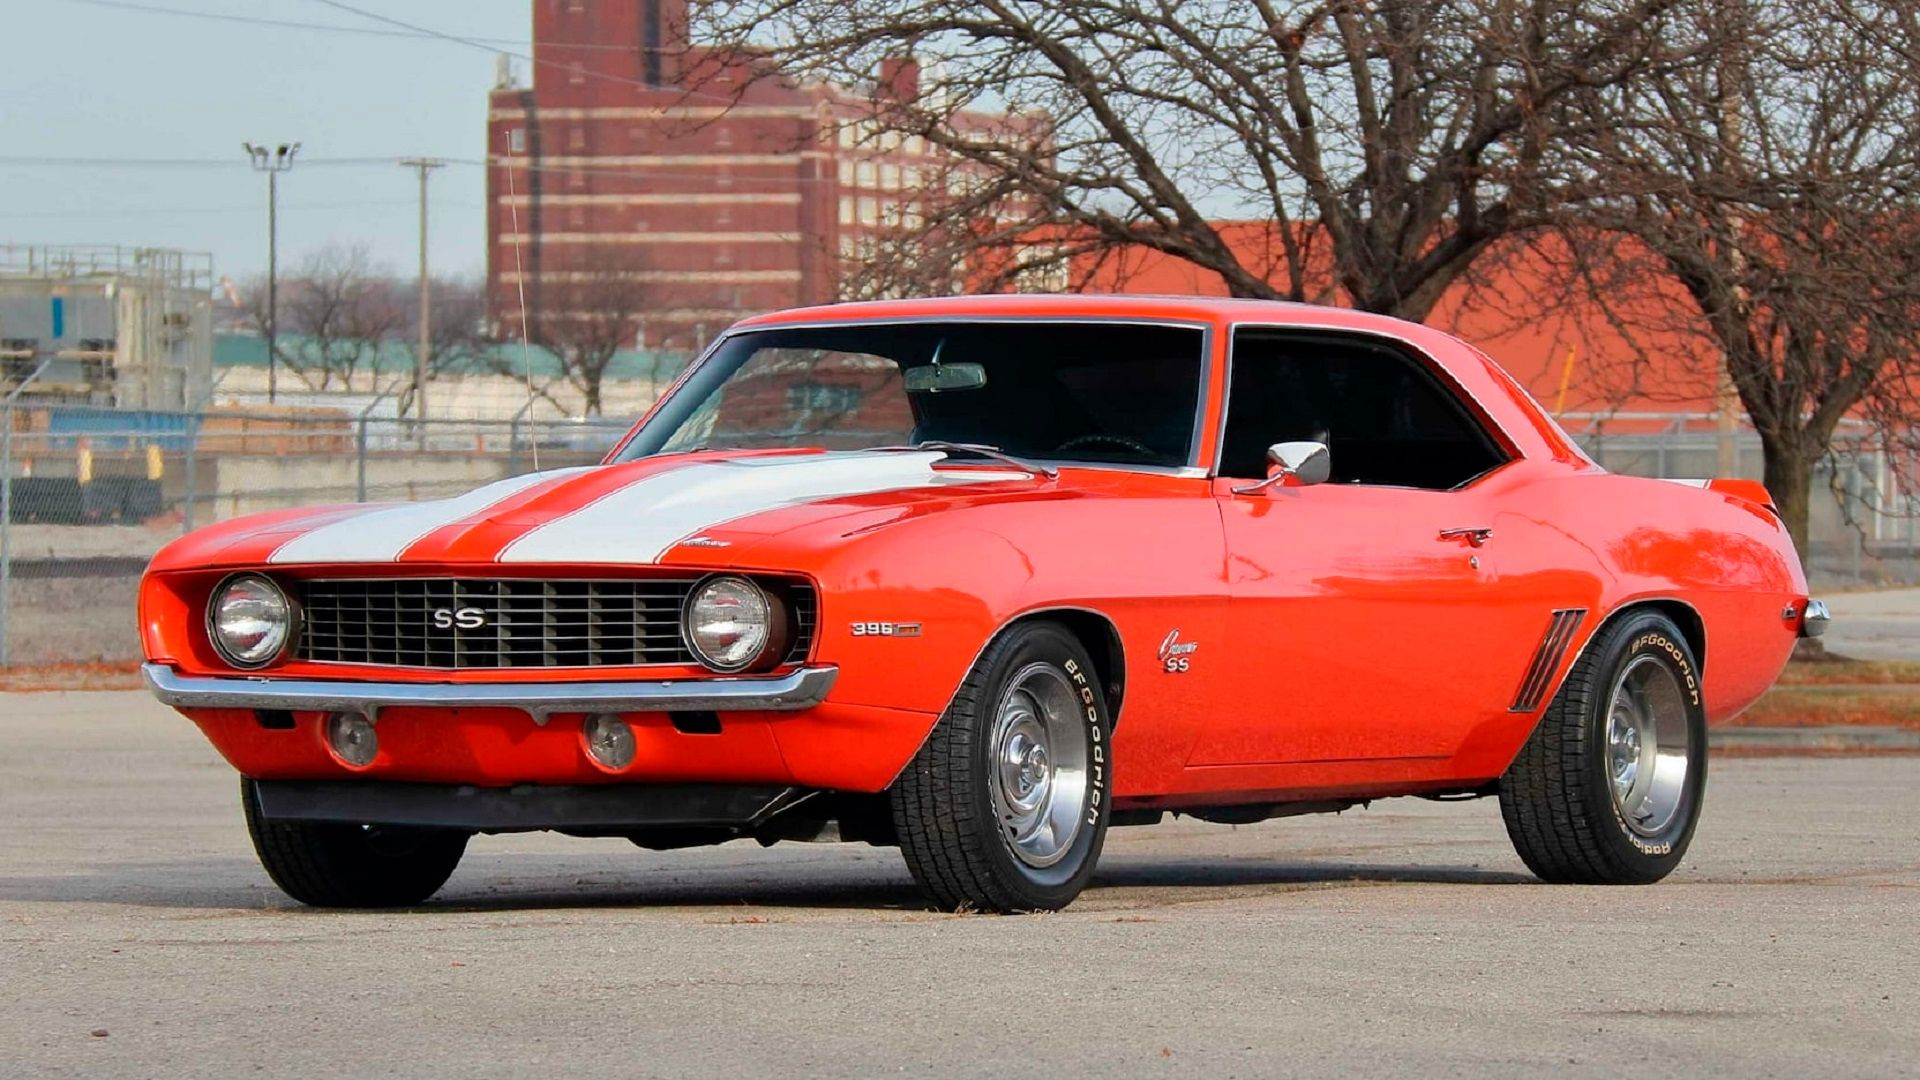 A parked 1969 Chevrolet Camaro SS